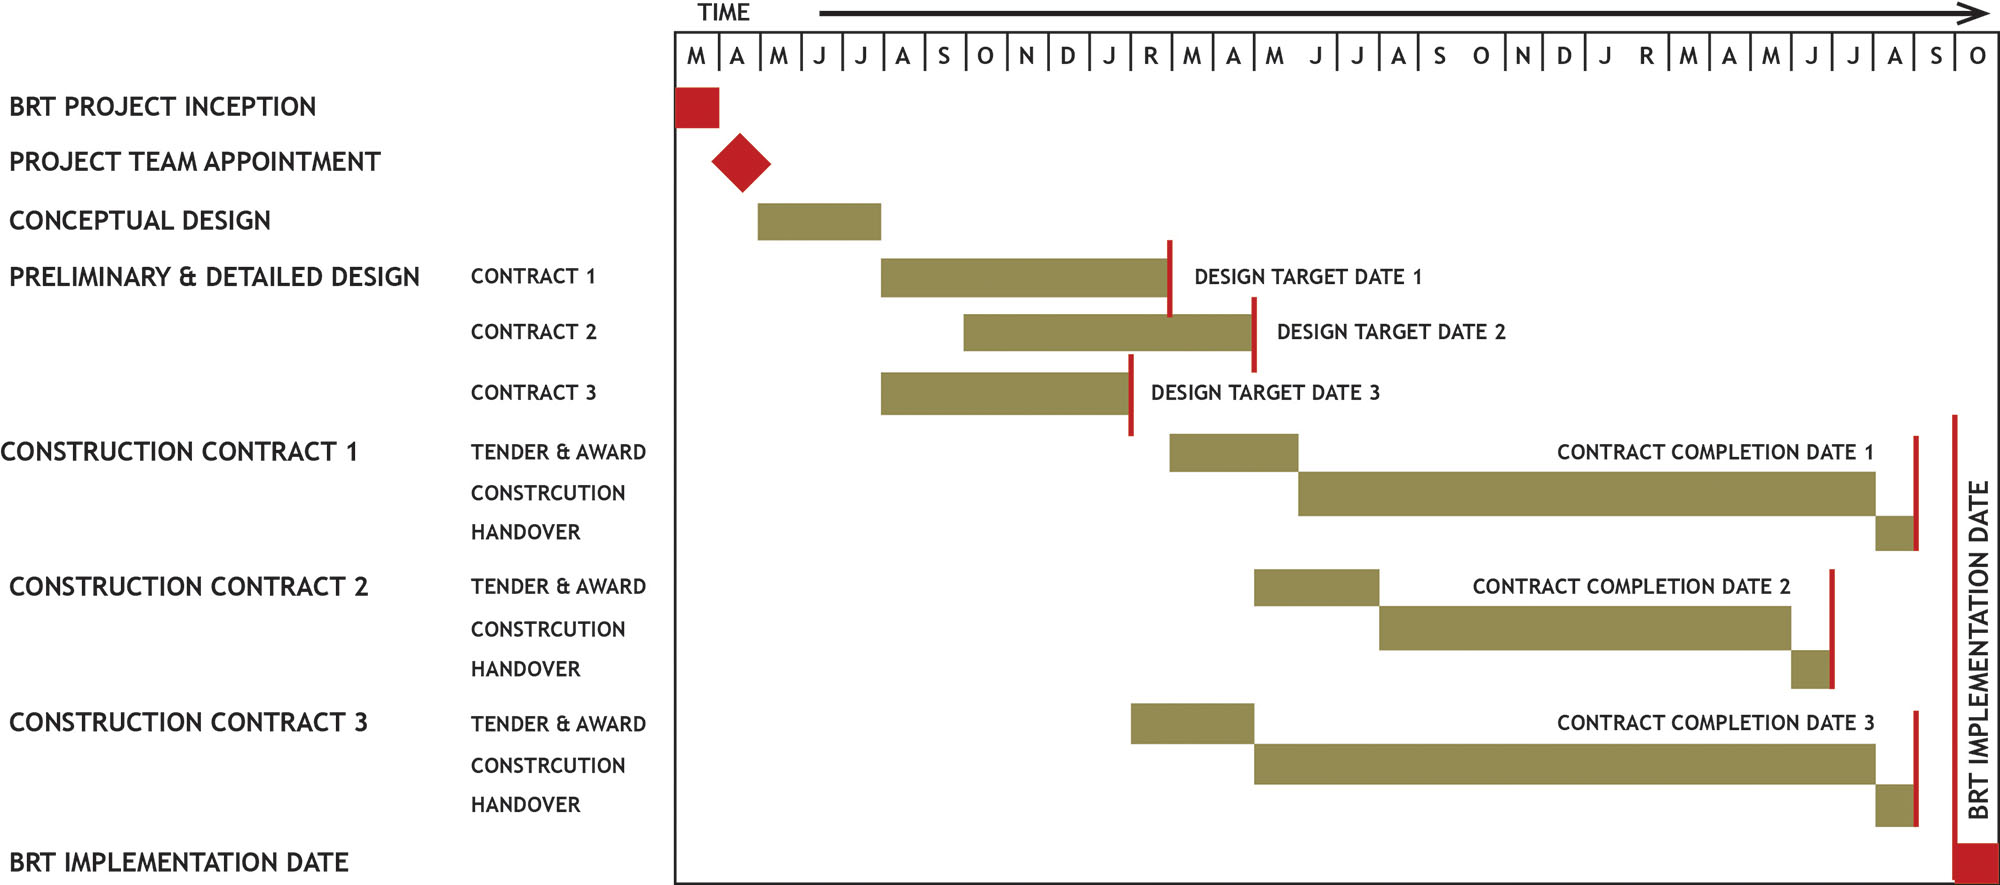 Fig. 21.11 Sample timeline for a typical BRT system design and construction.